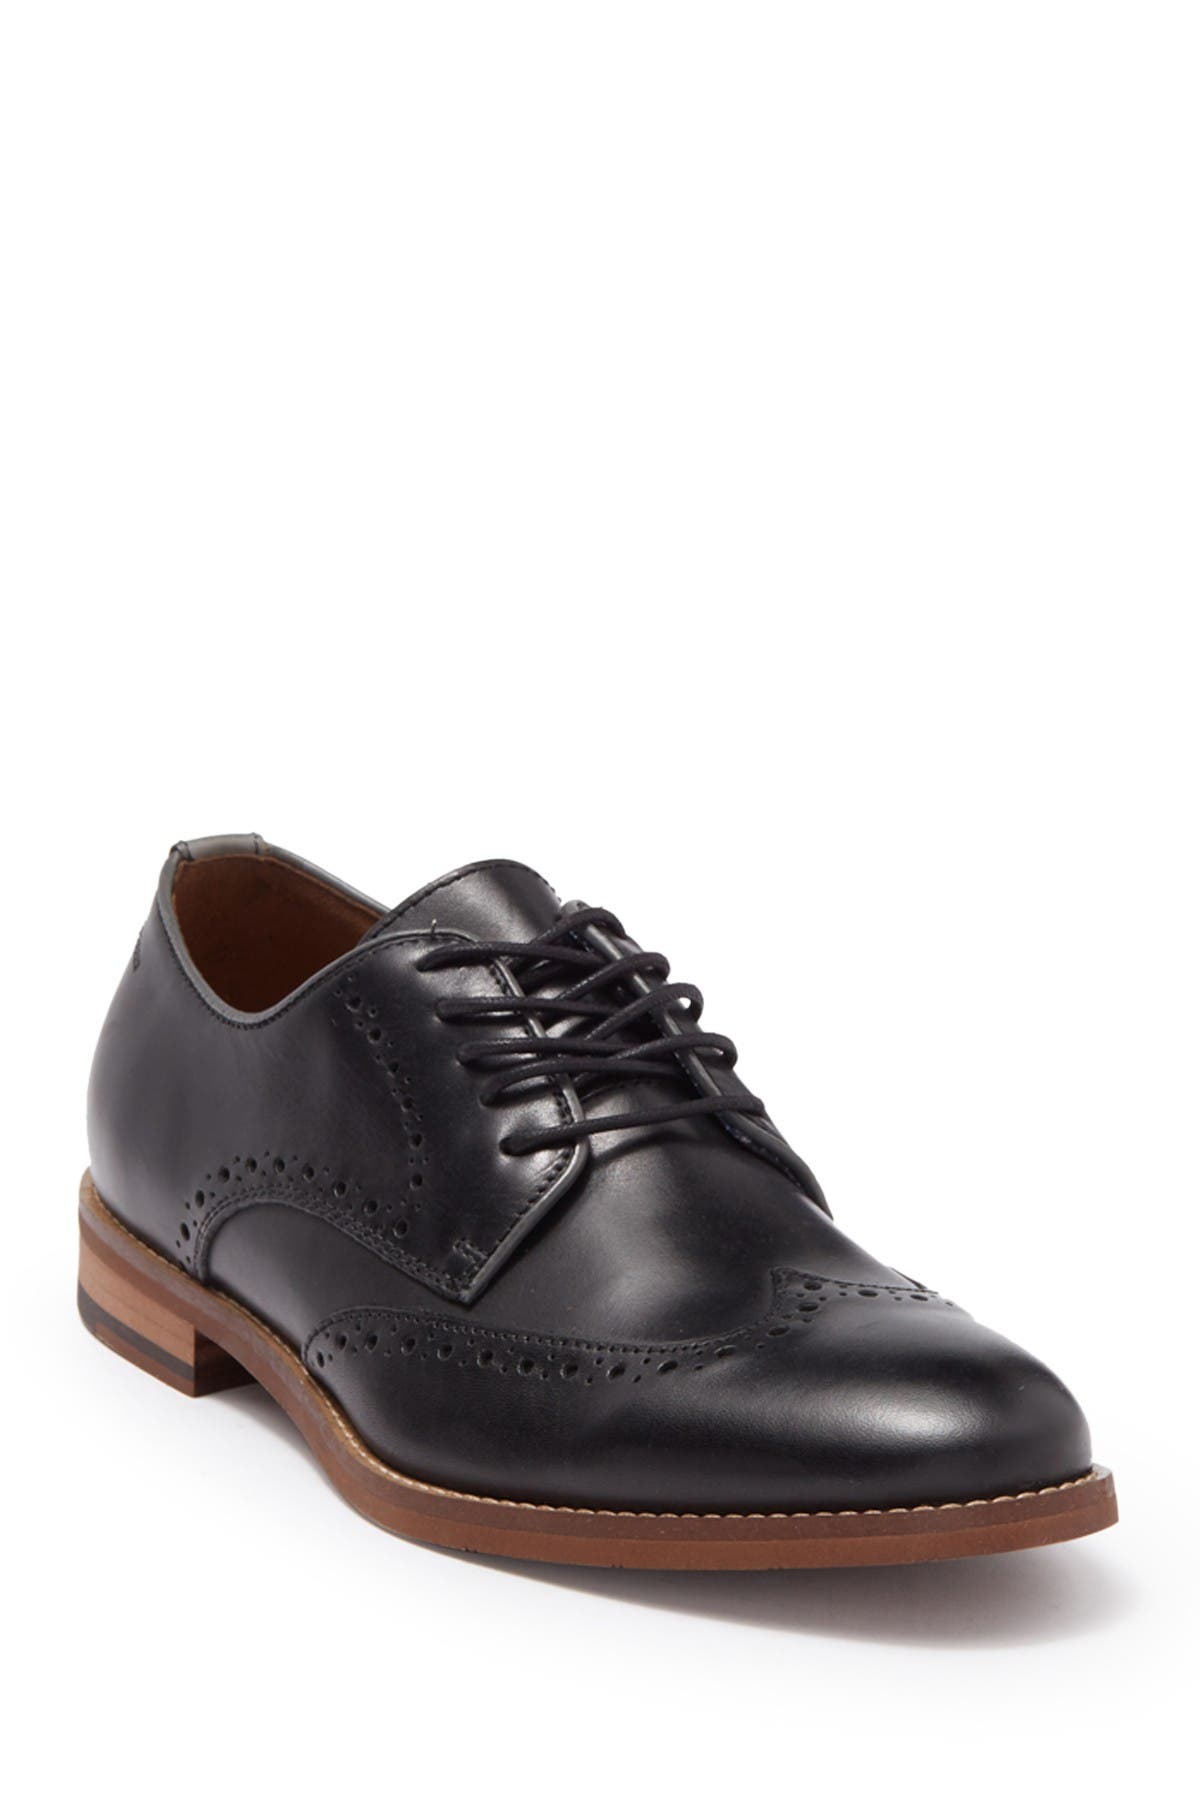 nordstrom oxford shoes